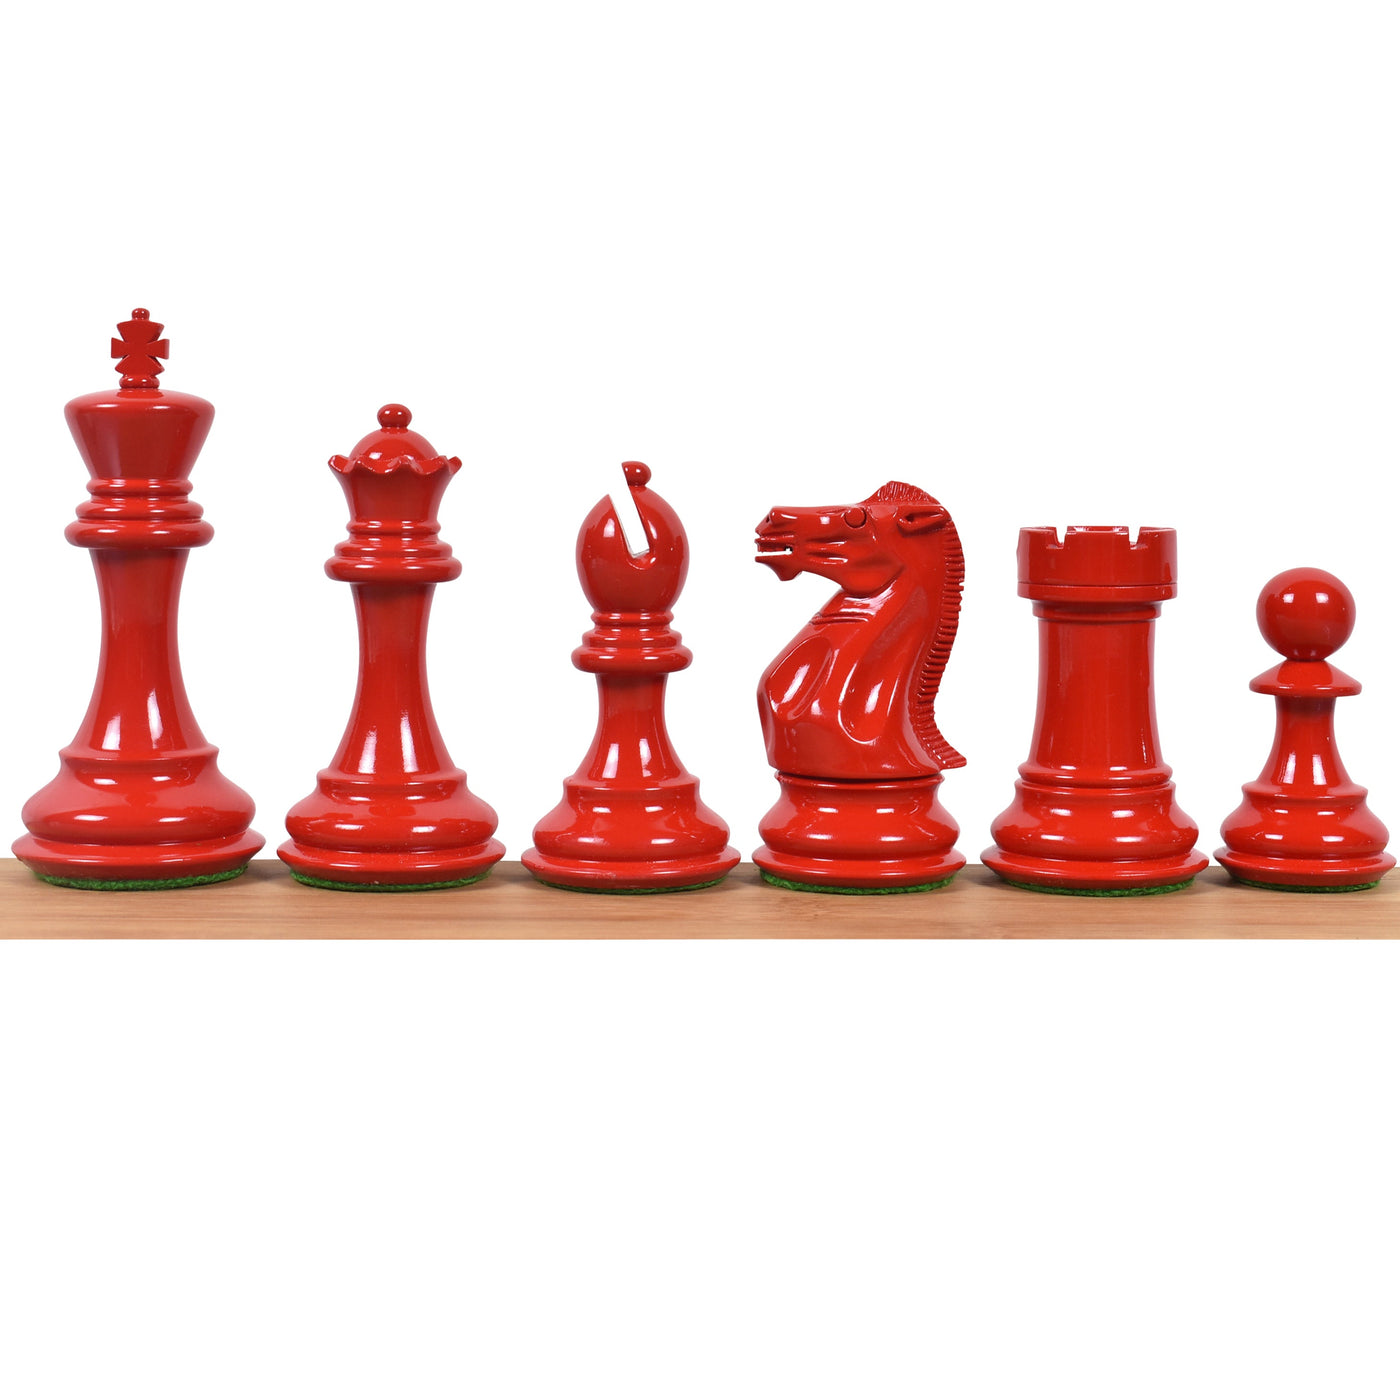 4.1" Pro Staunton Weighted Red & White Painted Wooden Chess Pieces with Borderless 55mm Square Chess board in Solid Ebony & Maple Wood and Leatherette Coffer Storage Box